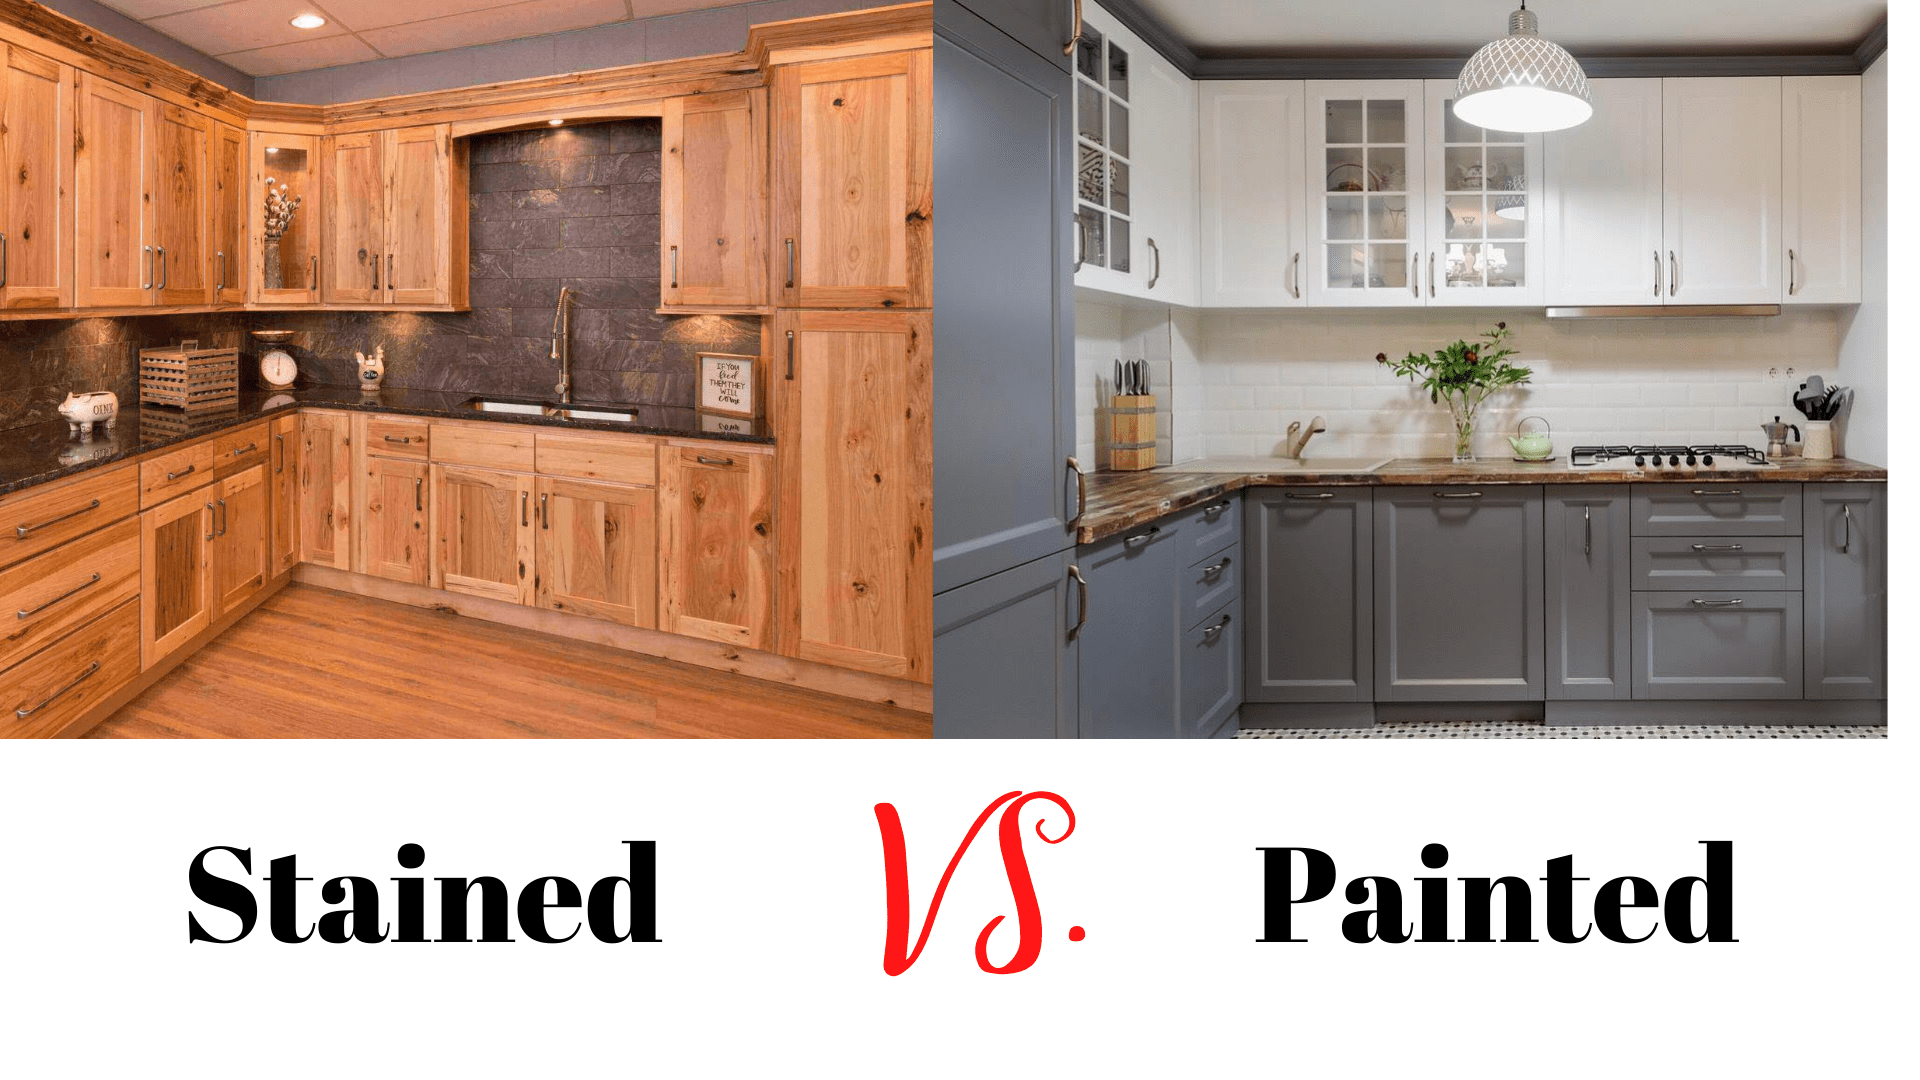 Painted Vs Stained Kitchen Cabinets, Which Is Better Staining Or Painting Kitchen Cabinets